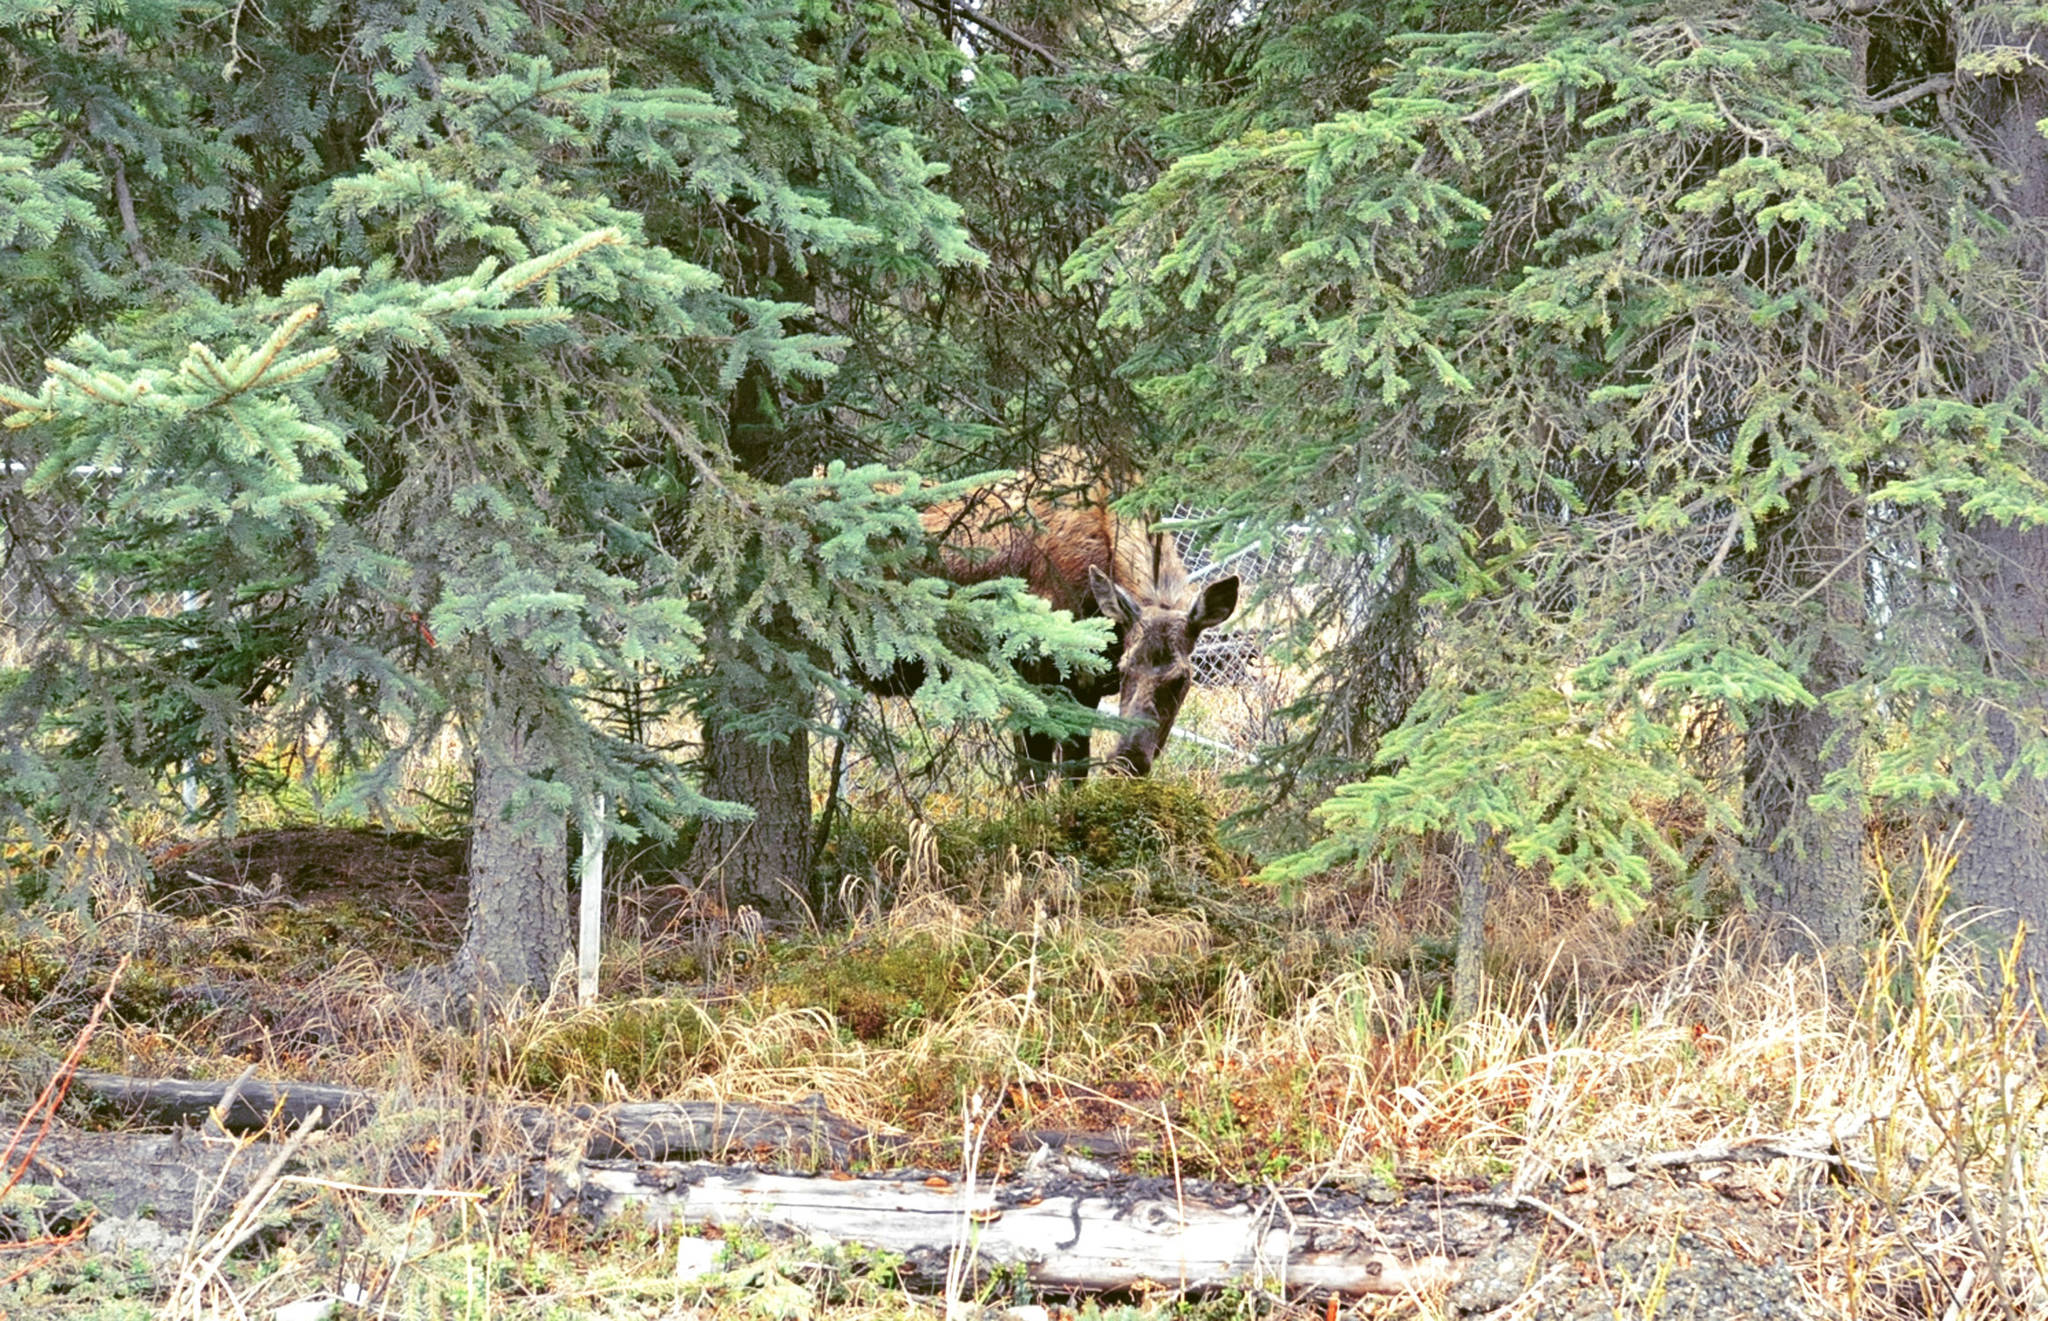 A cow moose browses in the trees near the Homer Electric Association building on Wednesday, May 16, 2018 in Kenai, Alaska. In the spring, female moose give birth to their calves, and are eating what they can after a long, lean winter, leading them to be somewhat defense and aggressive. The Alaska Department of Fish and Game warns people to stay away from moose this time of year. (Photo by Elizabeth Earl/Peninsula Clarion)